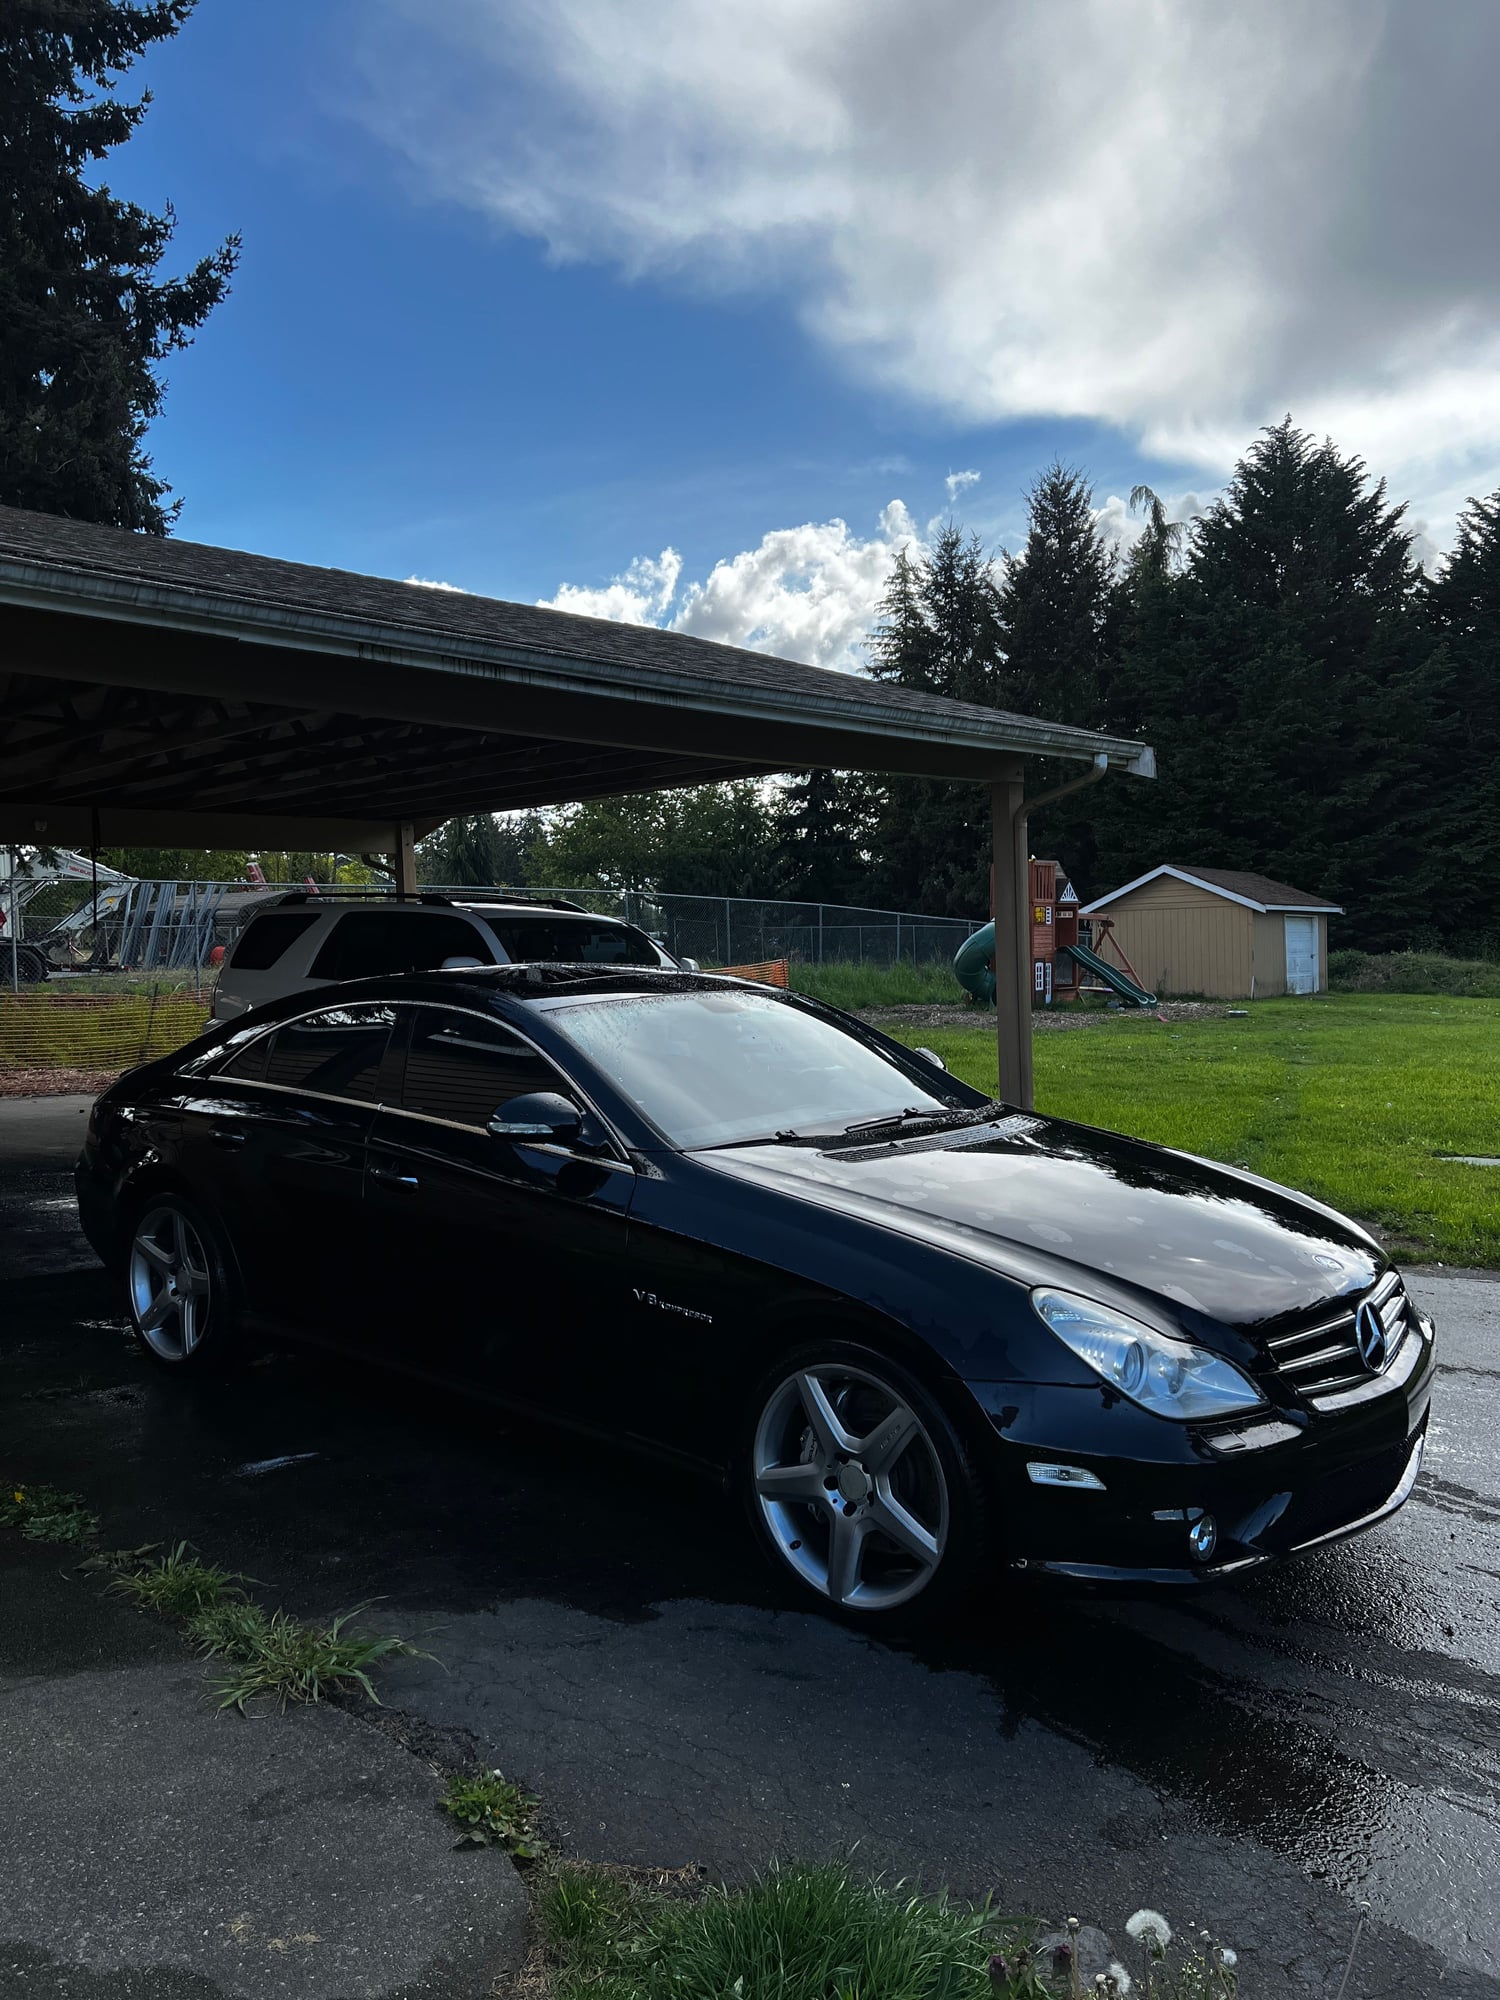 2006 Mercedes-Benz CLS55 AMG - CLS55 for sale (Stock) - Used - VIN WDDDJ76X66A040118 - 121,800 Miles - 8 cyl - 2WD - Automatic - Coupe - Black - Puyallup, WA 98373, United States